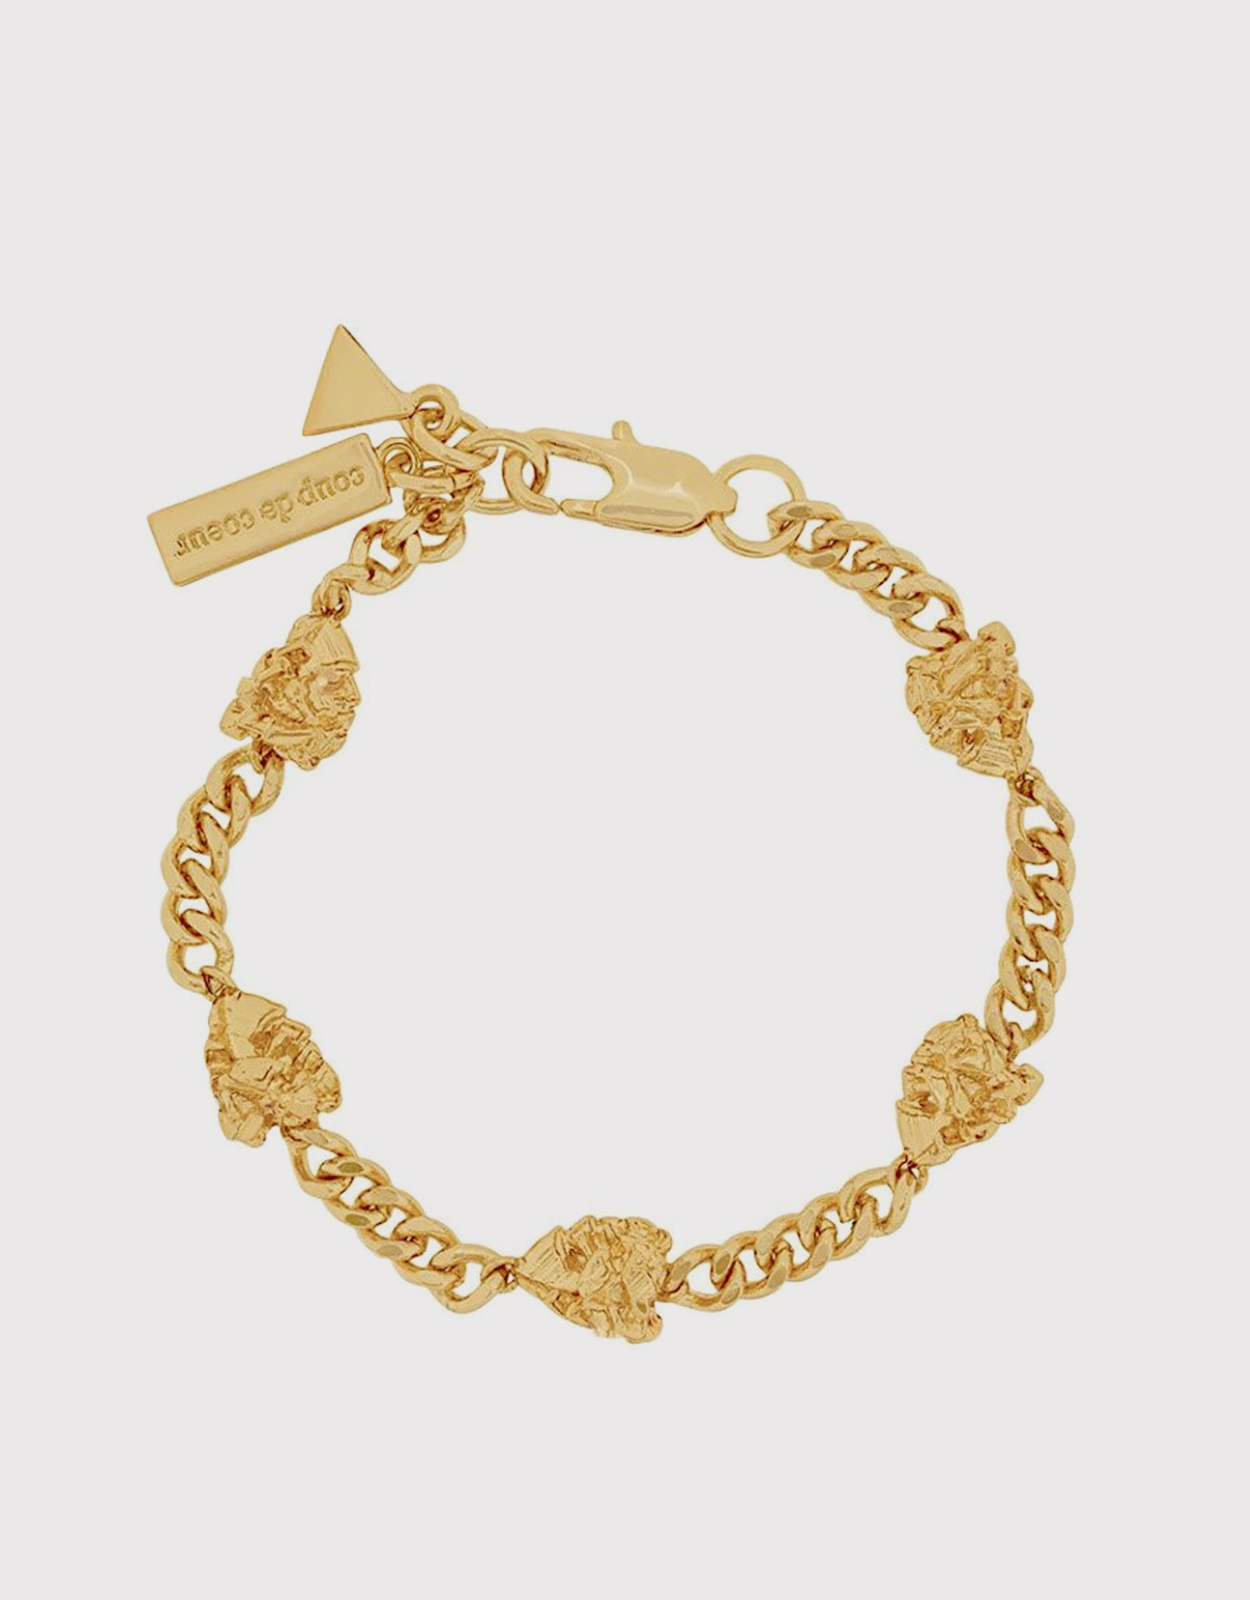 Radiant Diamond Bracelet in Yellow, White and Rose Gold